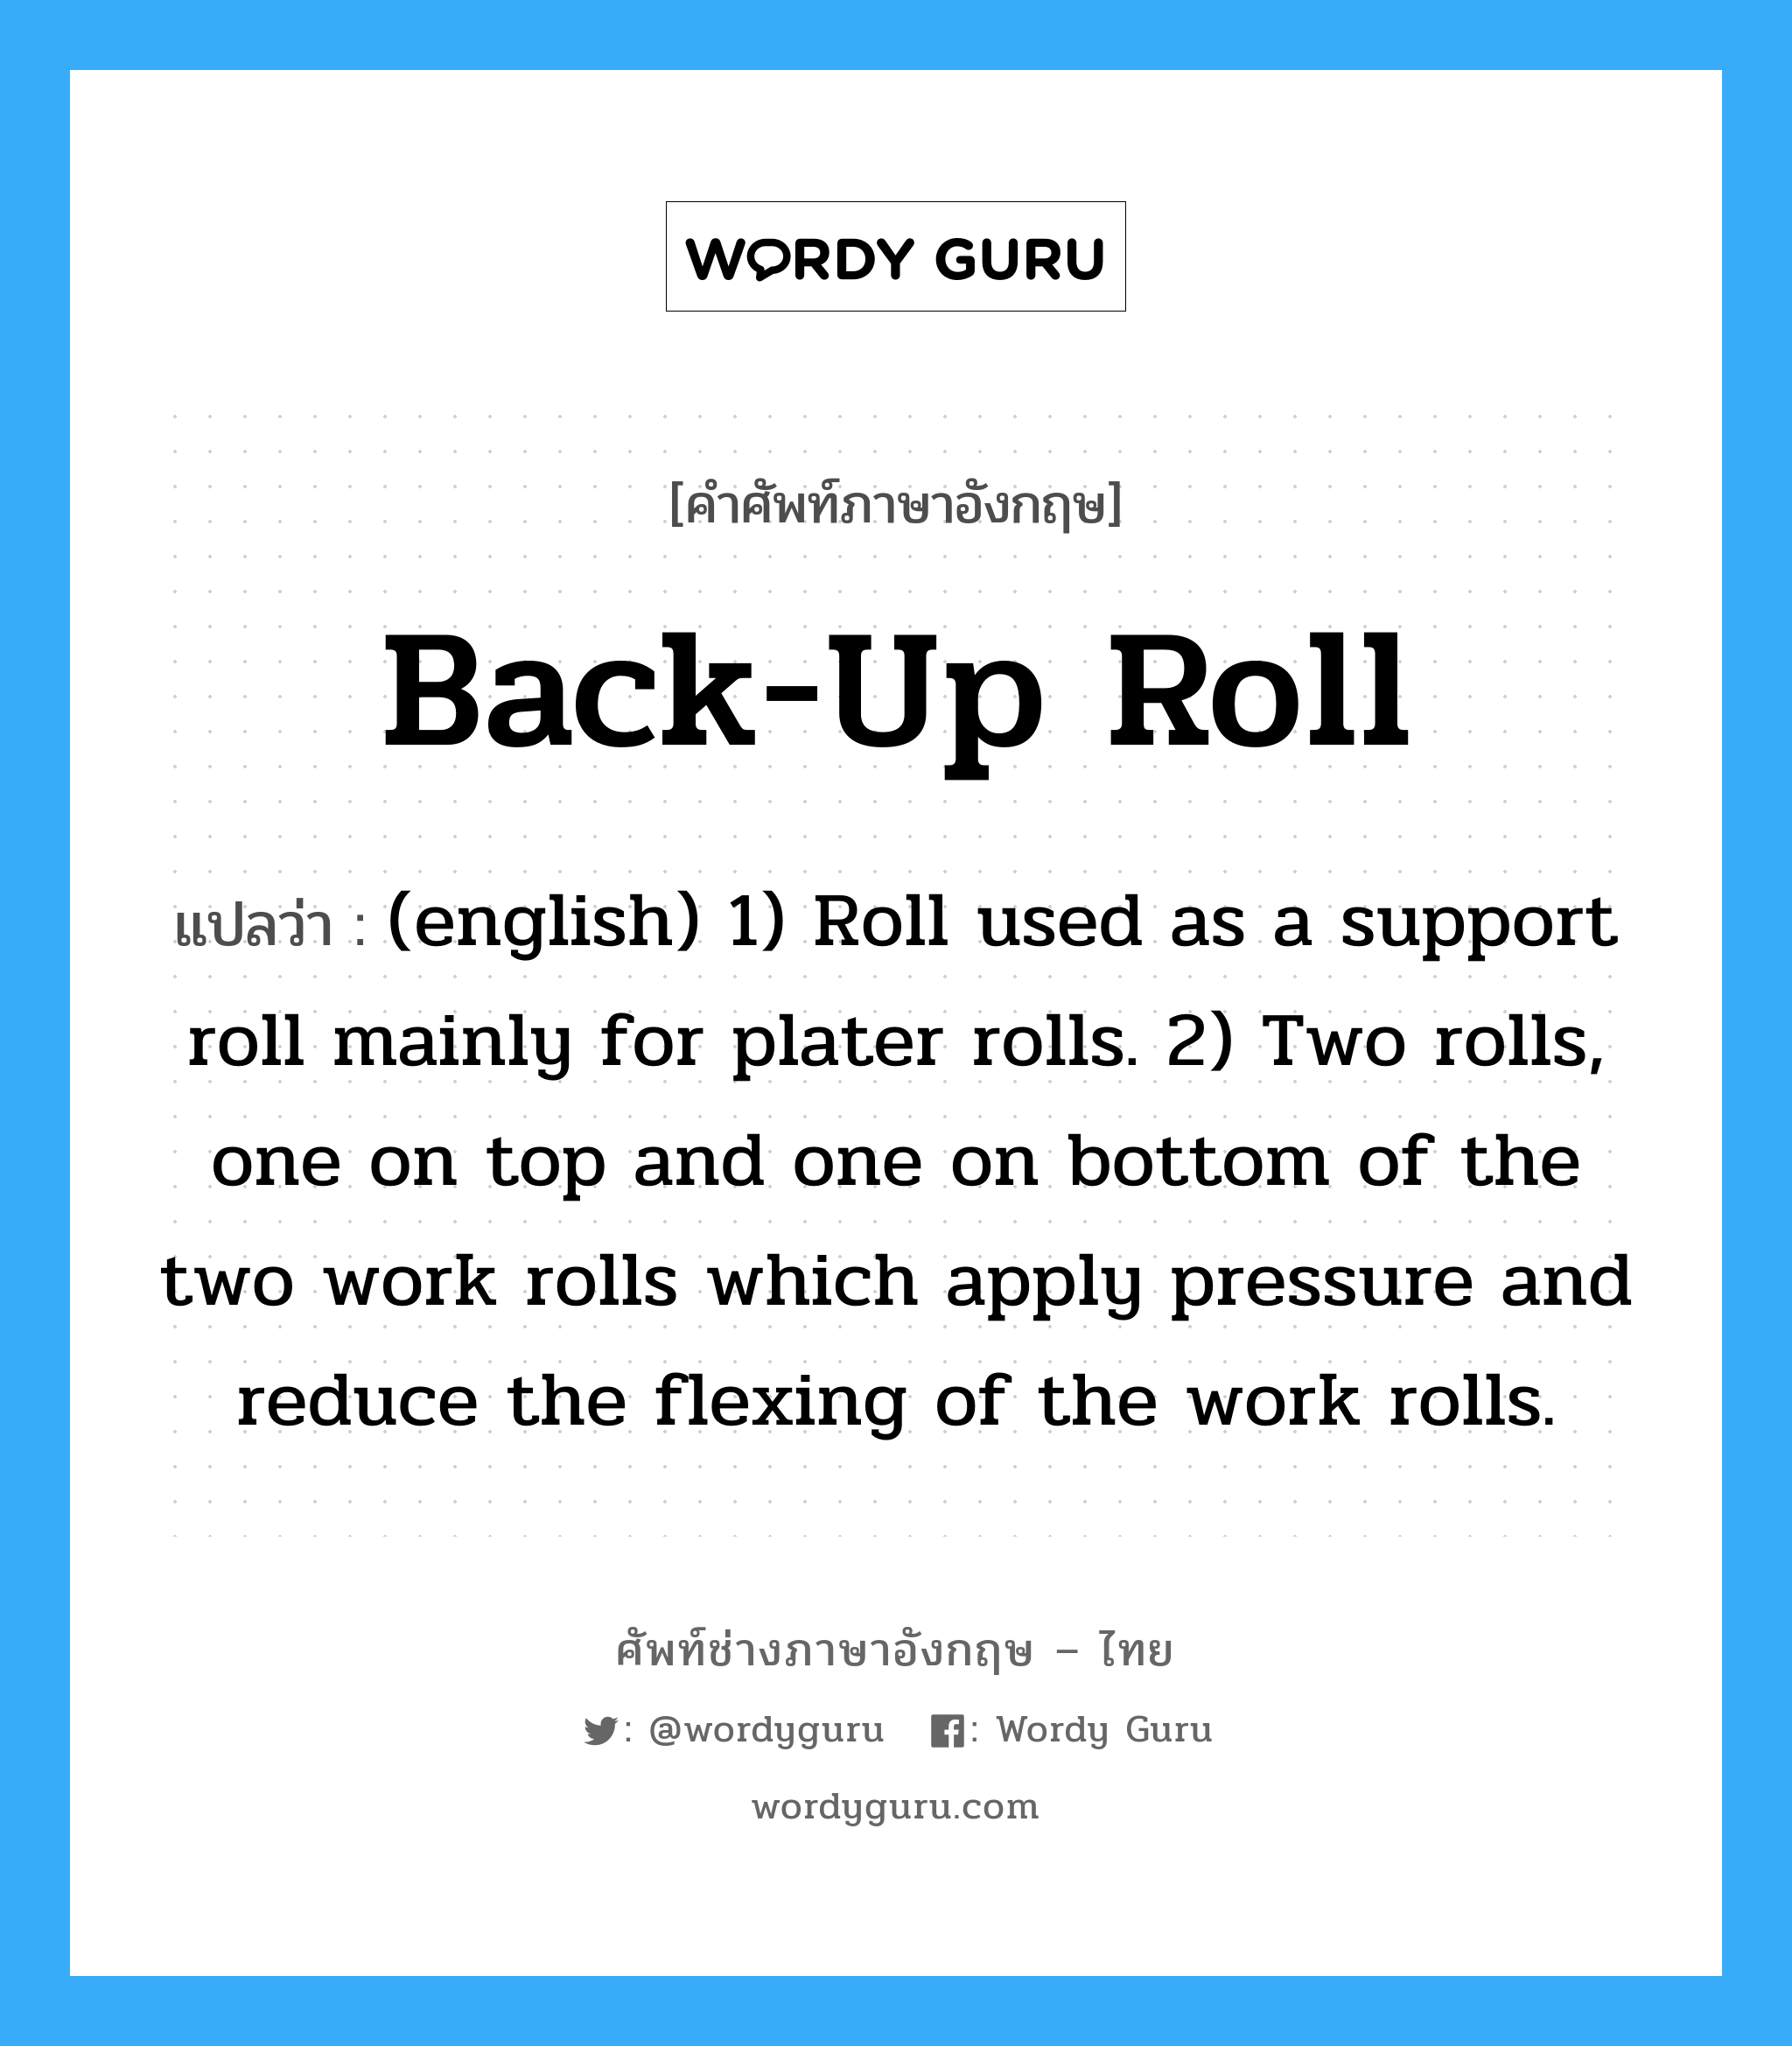 (english) 1) Roll used as a support roll mainly for plater rolls. 2) Two rolls, one on top and one on bottom of the two work rolls which apply pressure and reduce the flexing of the work rolls. ภาษาอังกฤษ?, คำศัพท์ช่างภาษาอังกฤษ - ไทย (english) 1) Roll used as a support roll mainly for plater rolls. 2) Two rolls, one on top and one on bottom of the two work rolls which apply pressure and reduce the flexing of the work rolls. คำศัพท์ภาษาอังกฤษ (english) 1) Roll used as a support roll mainly for plater rolls. 2) Two rolls, one on top and one on bottom of the two work rolls which apply pressure and reduce the flexing of the work rolls. แปลว่า Back-up Roll